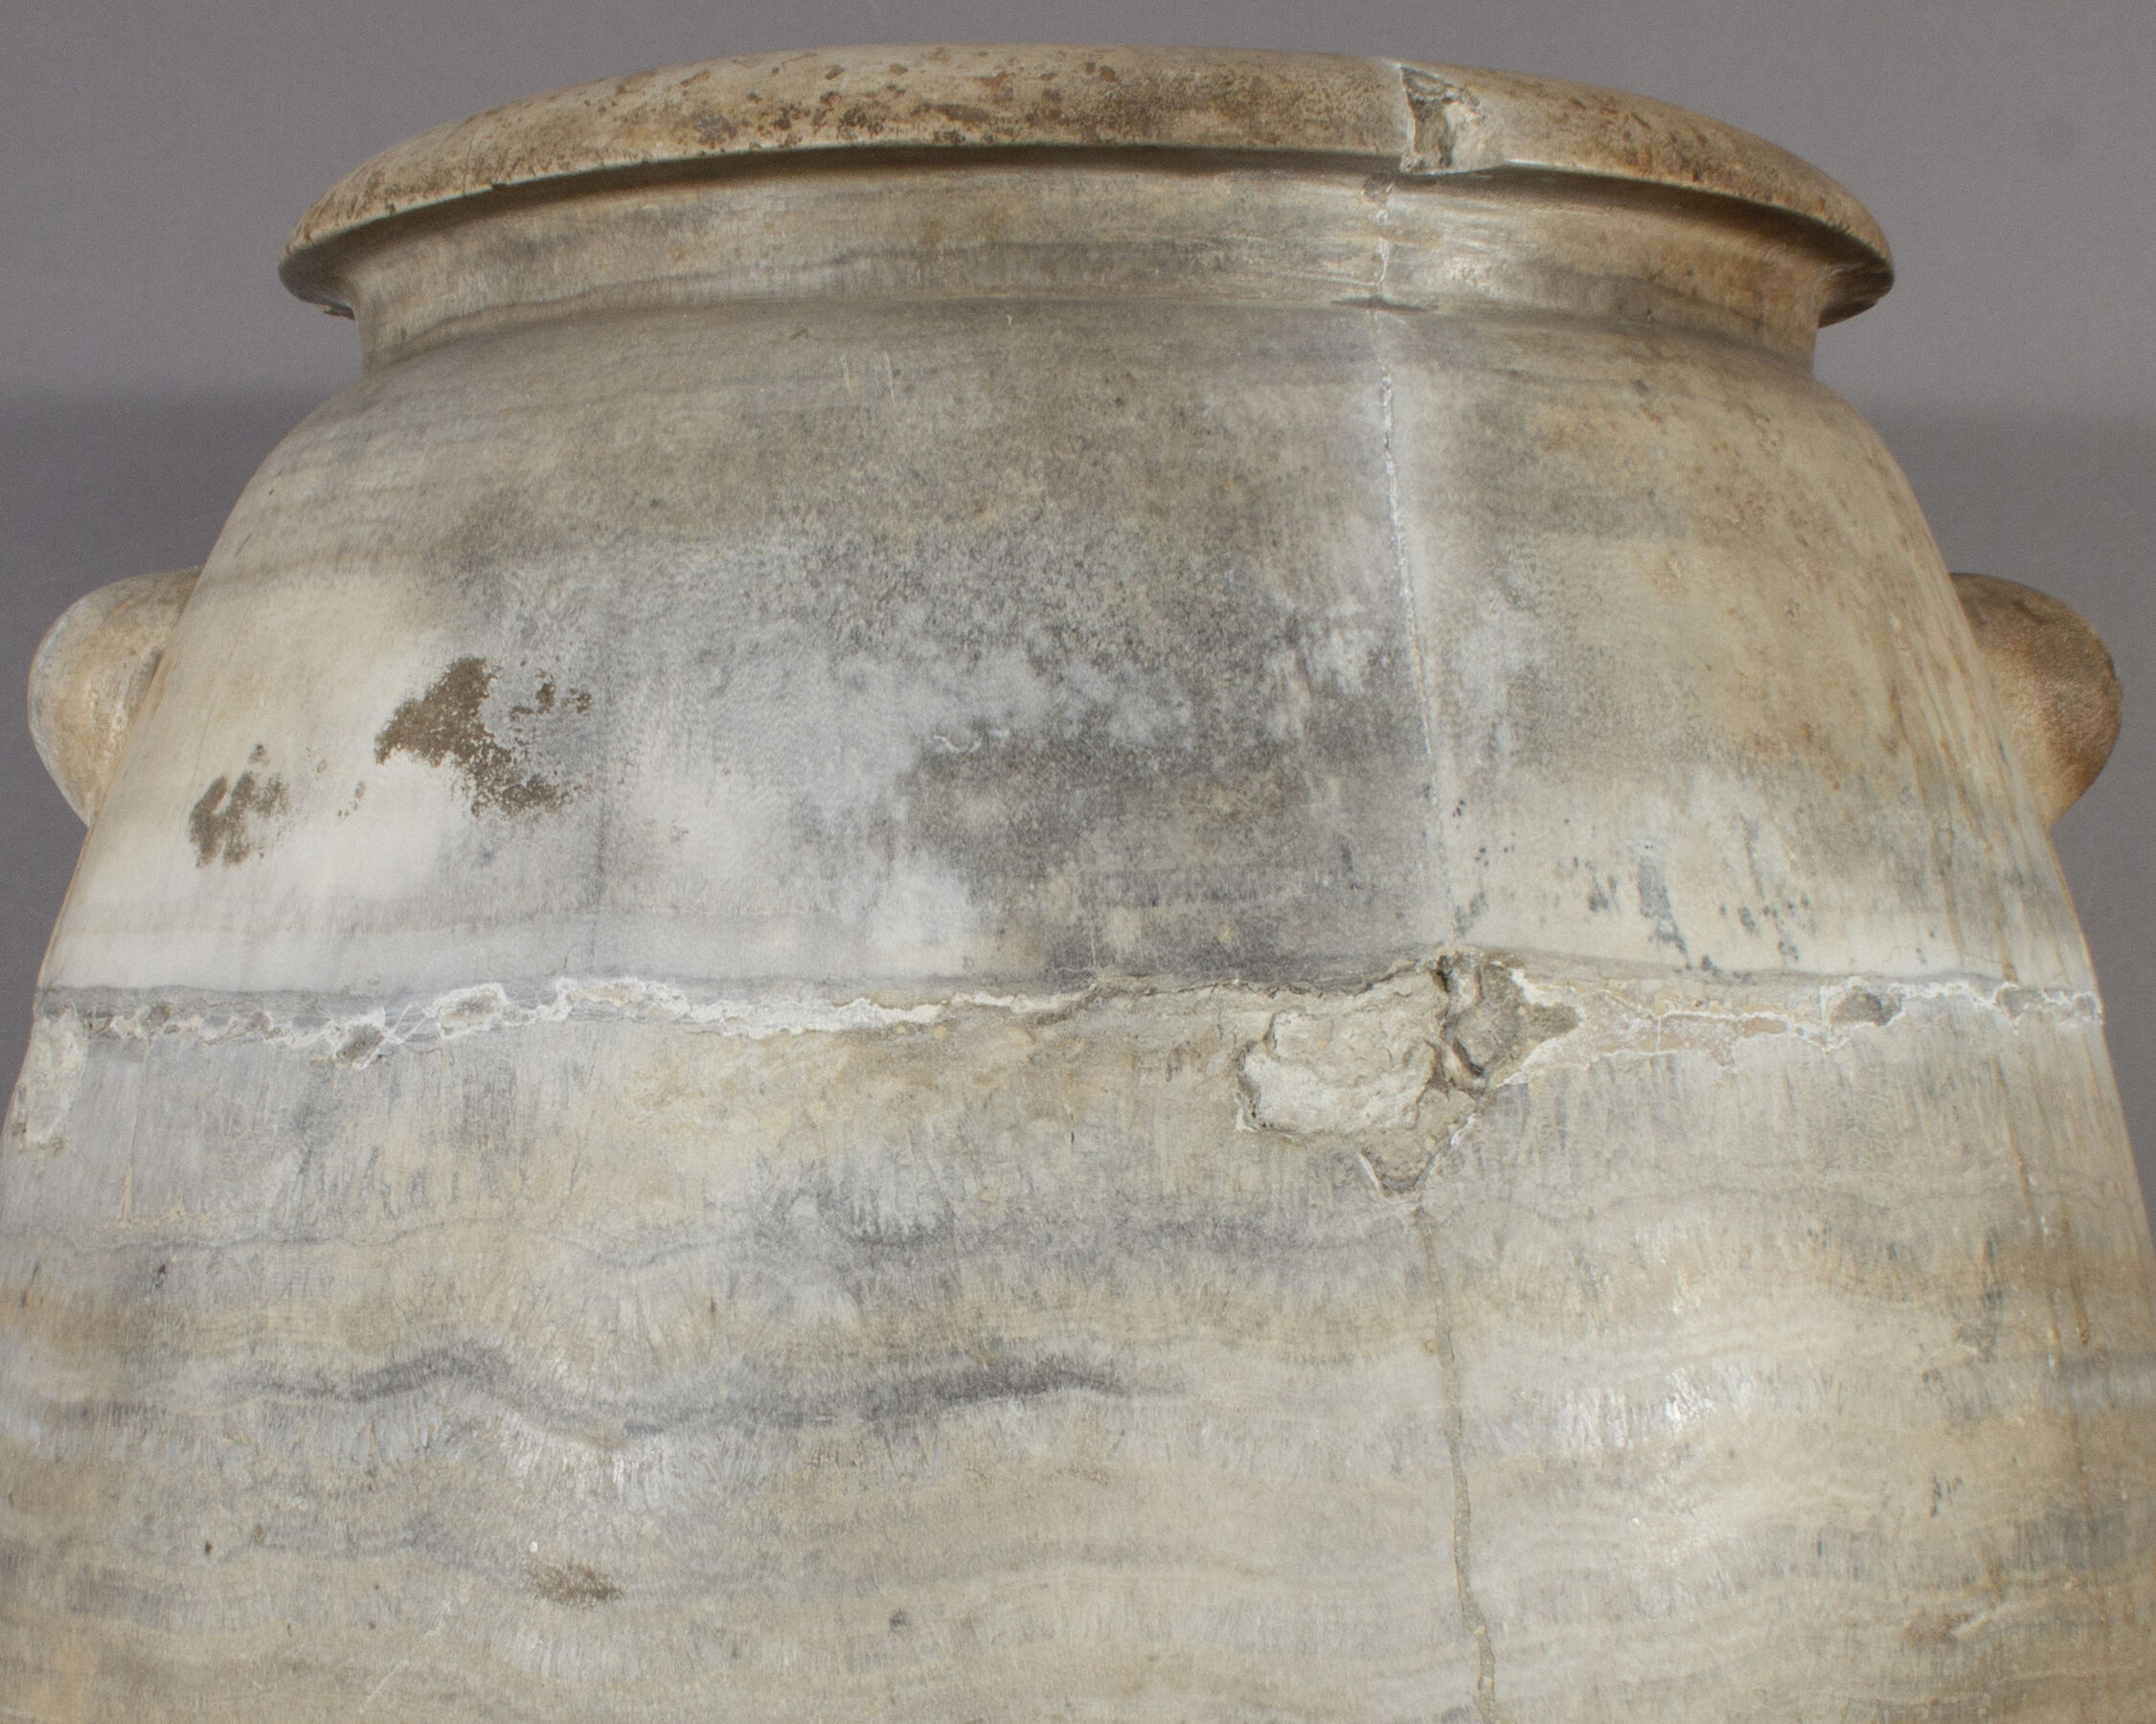 Detail of cracked discolored repairs to stone storage jar.